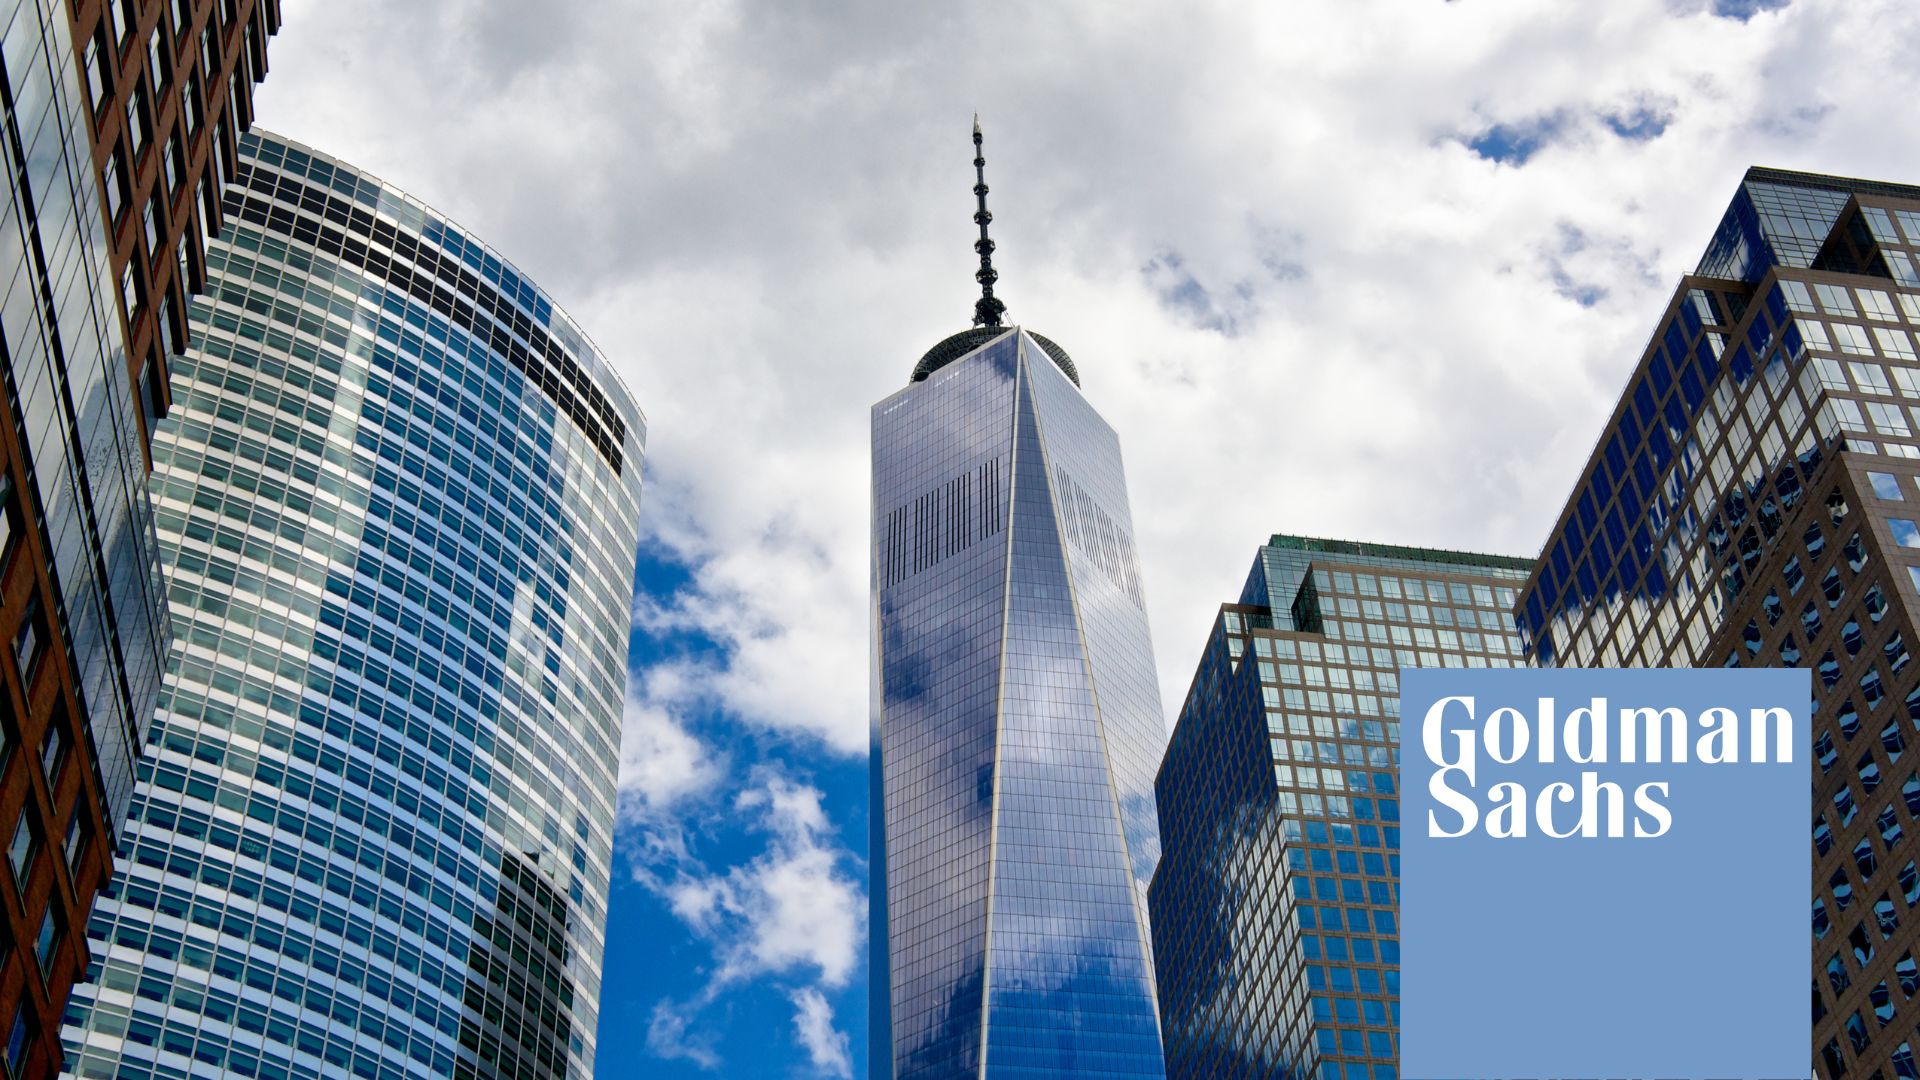 In Op-Ed, Goldman Sachs SEO Calls on Congress to Reform SBA to Help Small Businesses